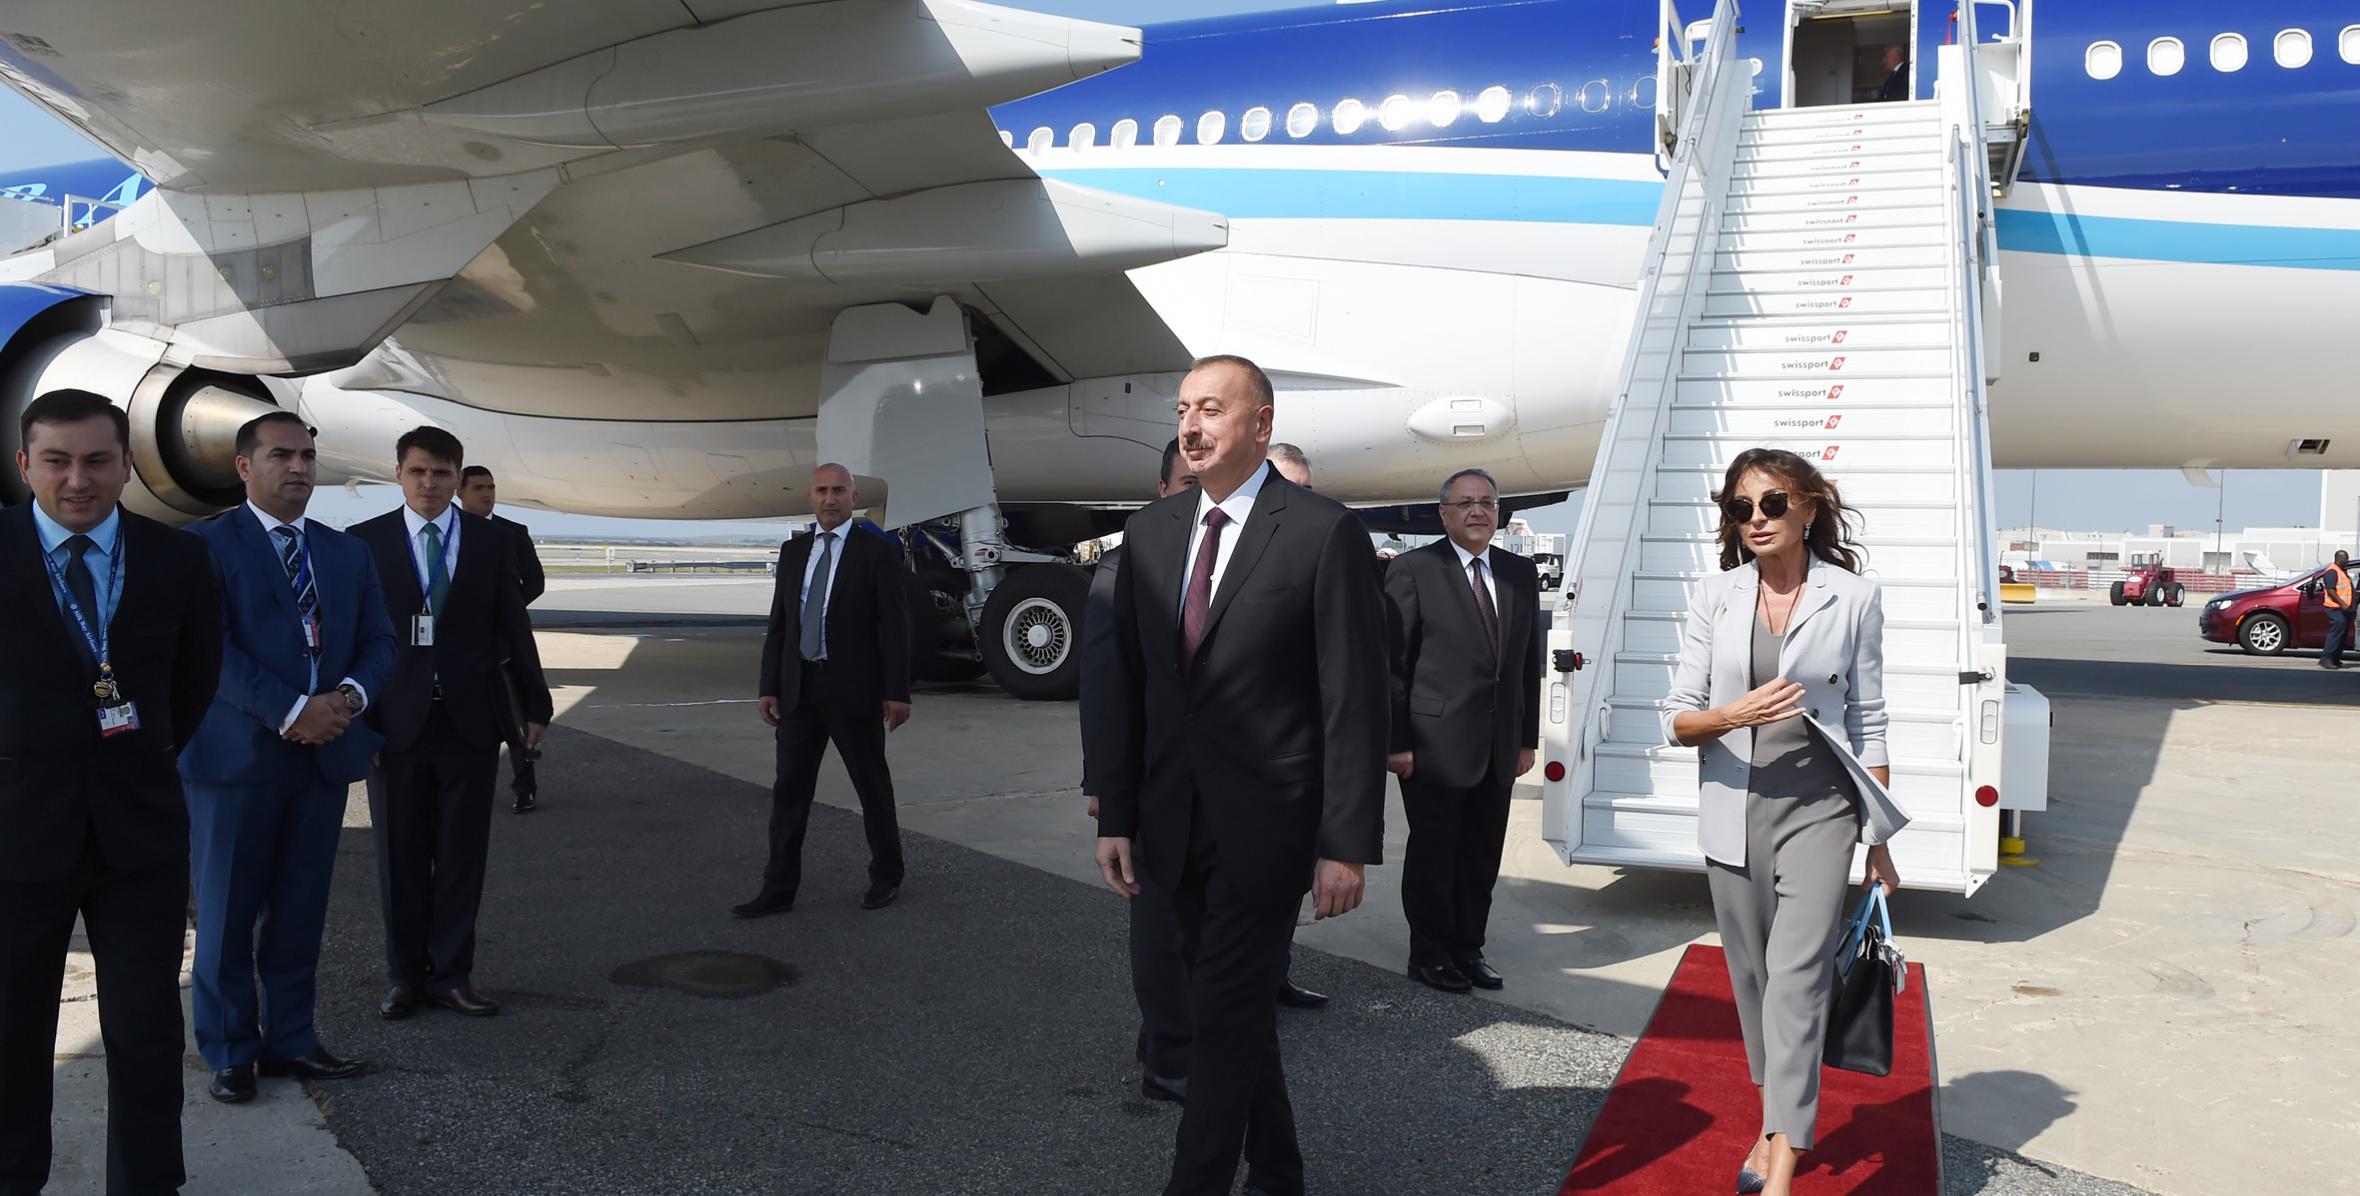 Ilham Aliyev arrived in the United States for visit